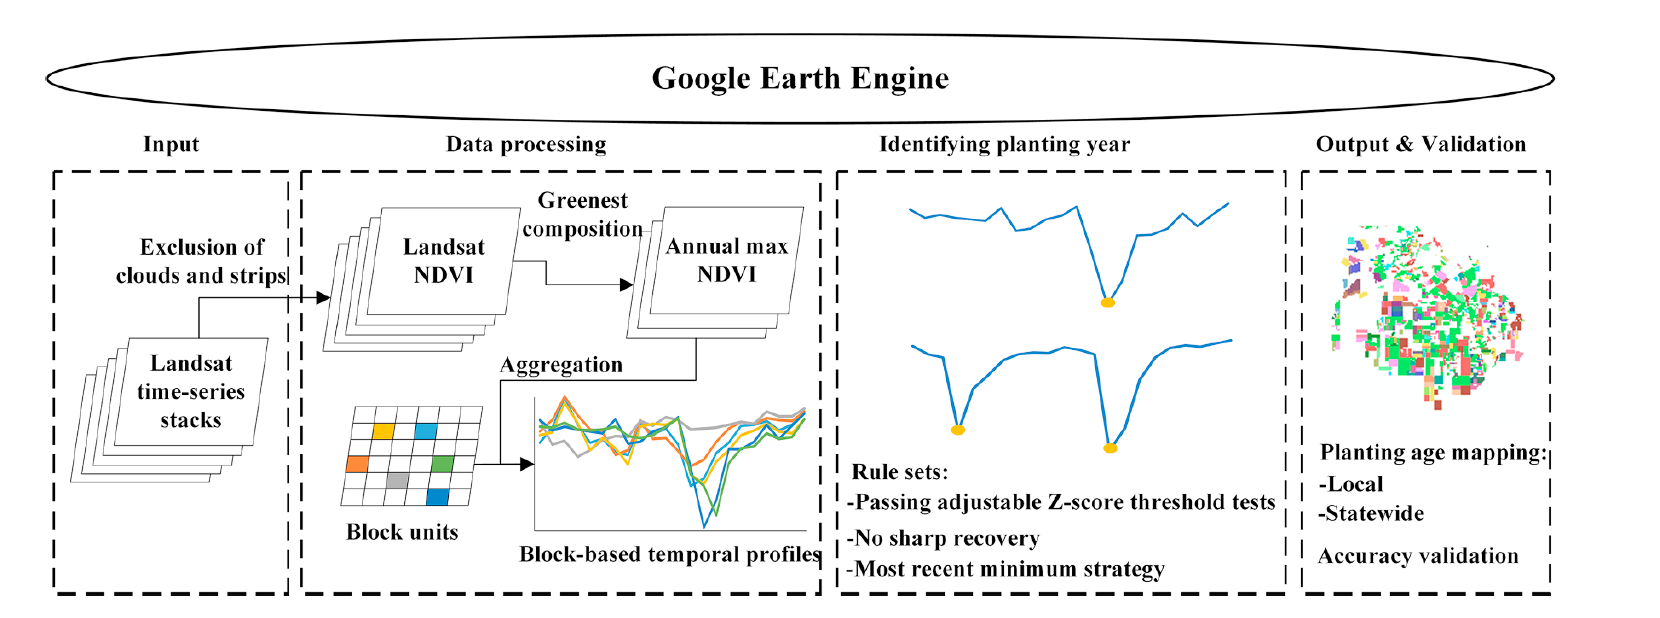 Google Earth Engine workflow for EO analysis, sample analysis for a project mapping tree age in California orchards, source: [Chen et al. 2019](https://www.researchgate.net/publication/331859762_Automatic_mapping_of_planting_year_for_tree_crops_with_Landsat_satellite_time_series_stacks)